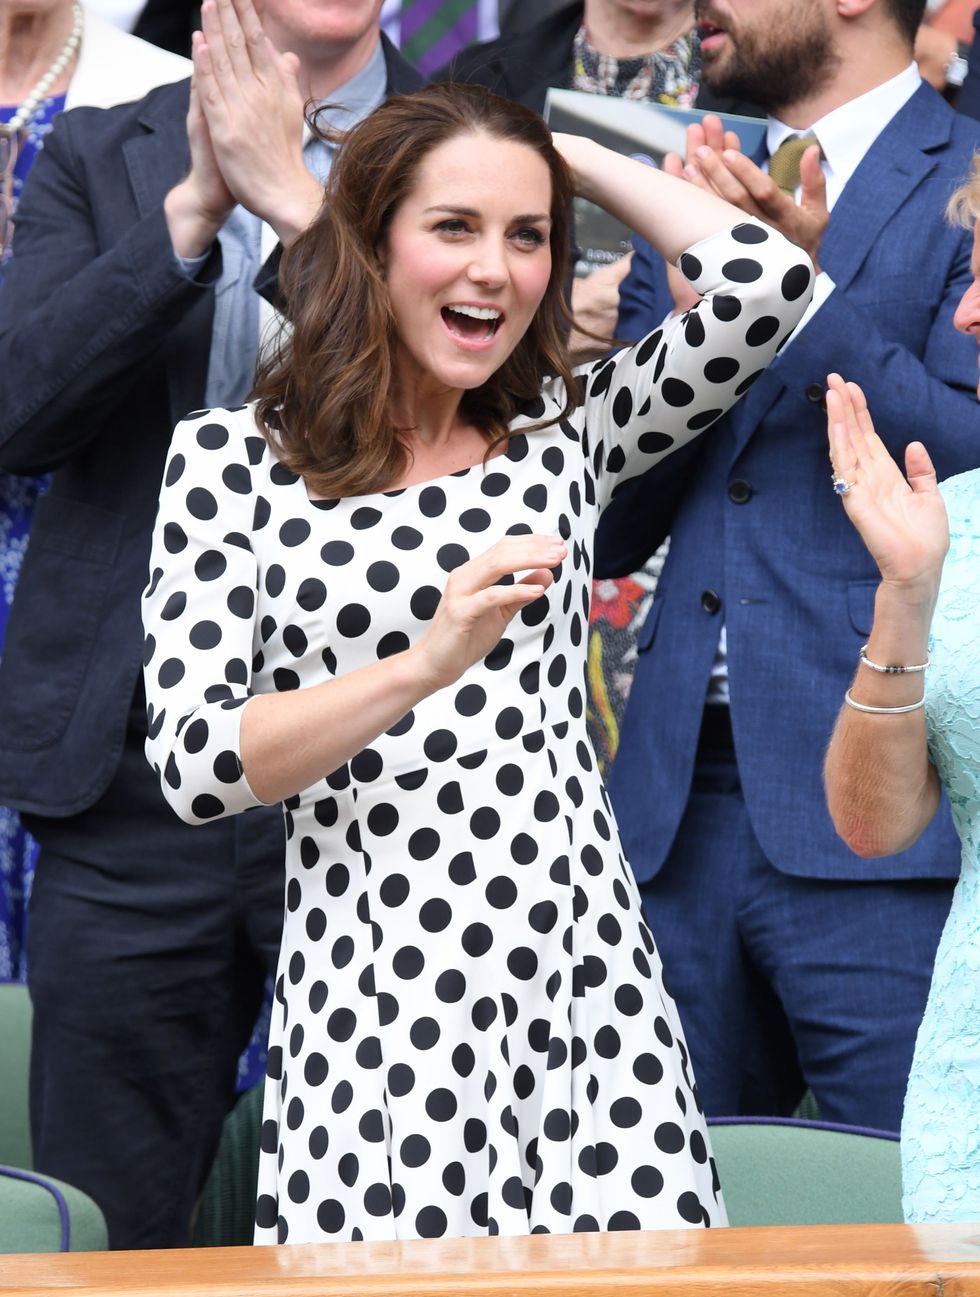 LONDON, ENGLAND - JULY 03:  Catherine, Duchess of Cambridge attends day one of the Wimbledon Tennis Championships at Wimbledon on July 3, 2017 in London, United Kingdom.  (Photo by Karwai Tang/WireImage)